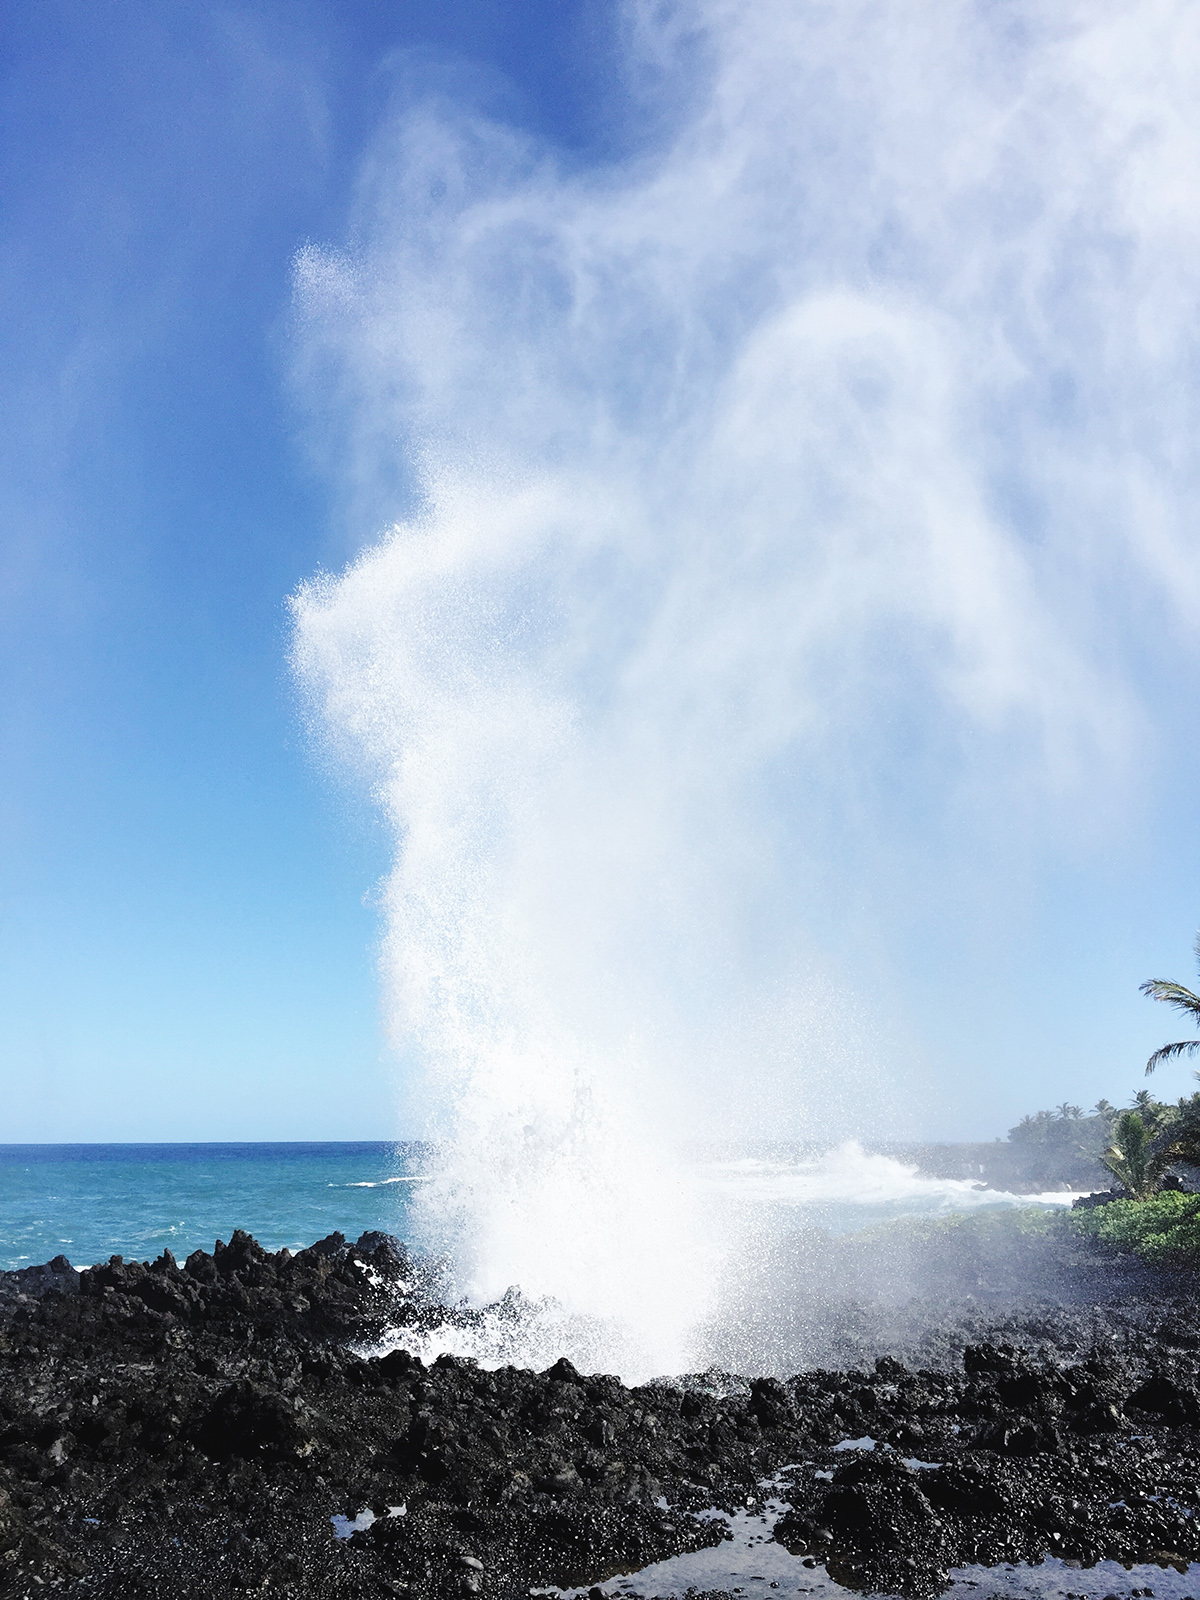 Need to know where to eat and what to do on Maui? Read my recommendations on the blog!